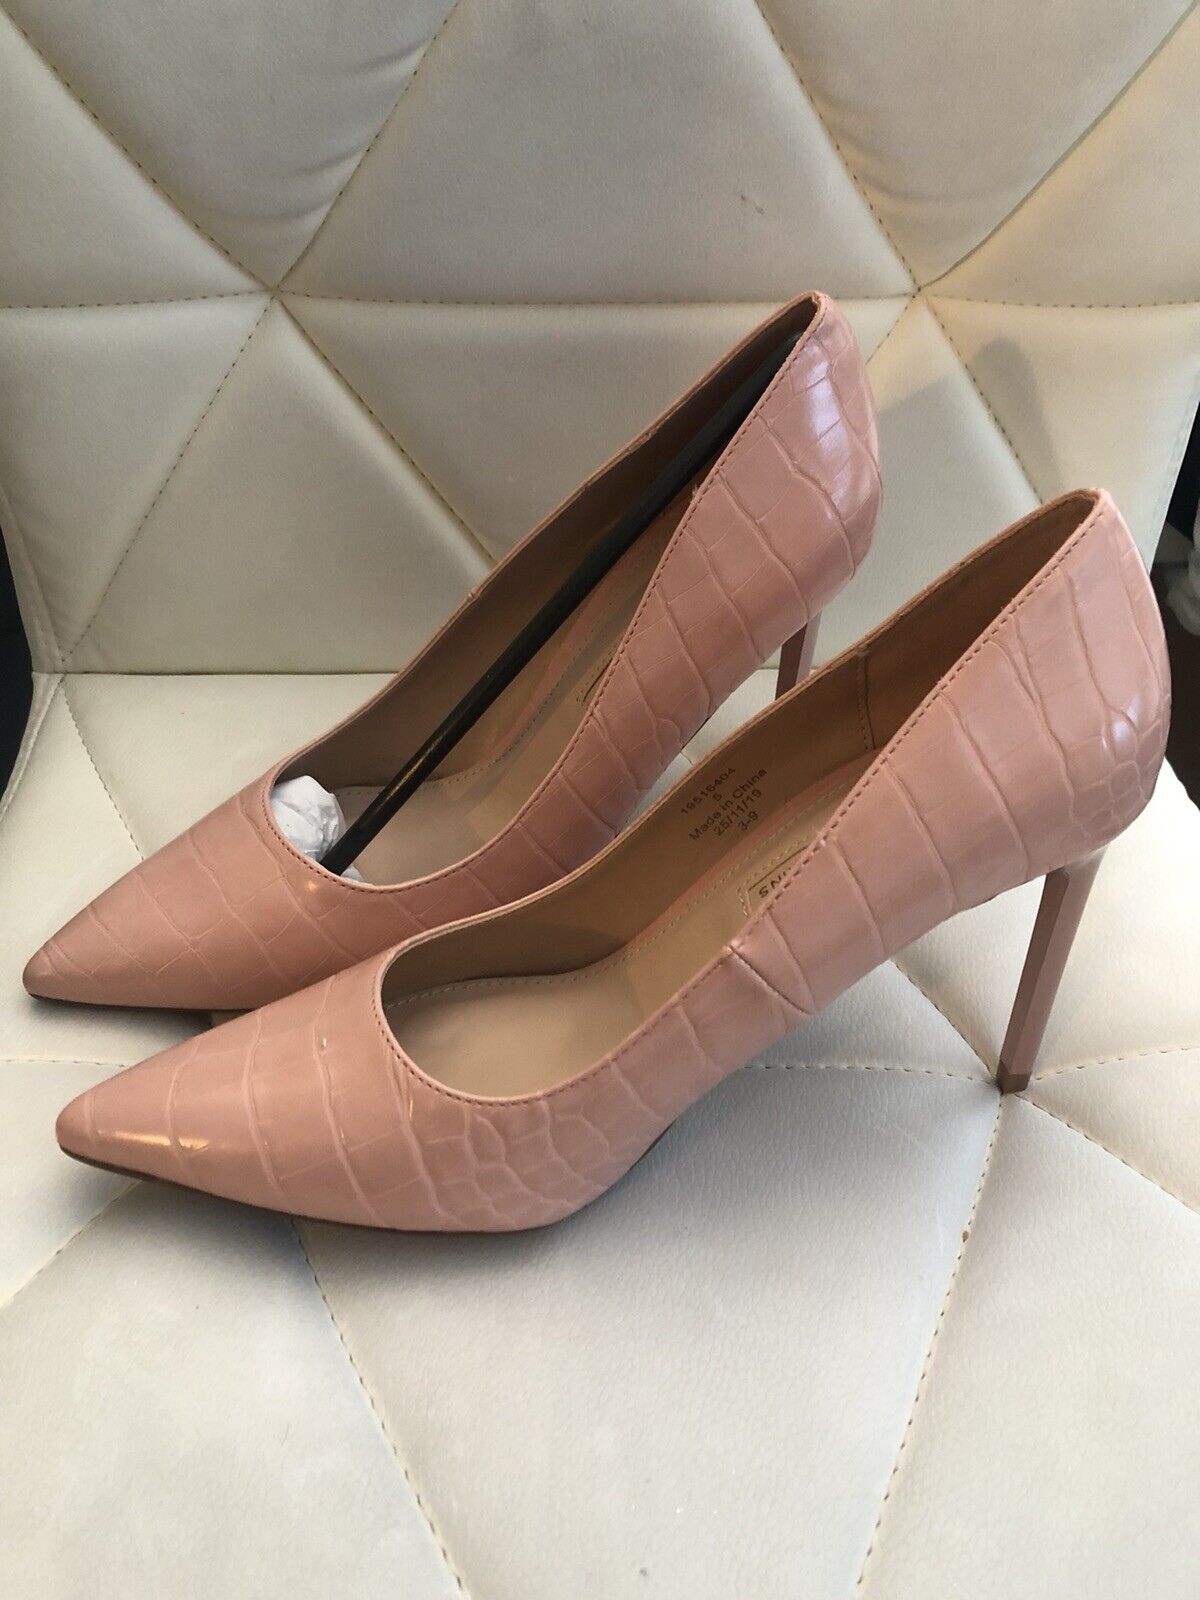 Ladies Max 79% OFF Size Max 88% OFF 5 Blush Shoes. NEW Pink